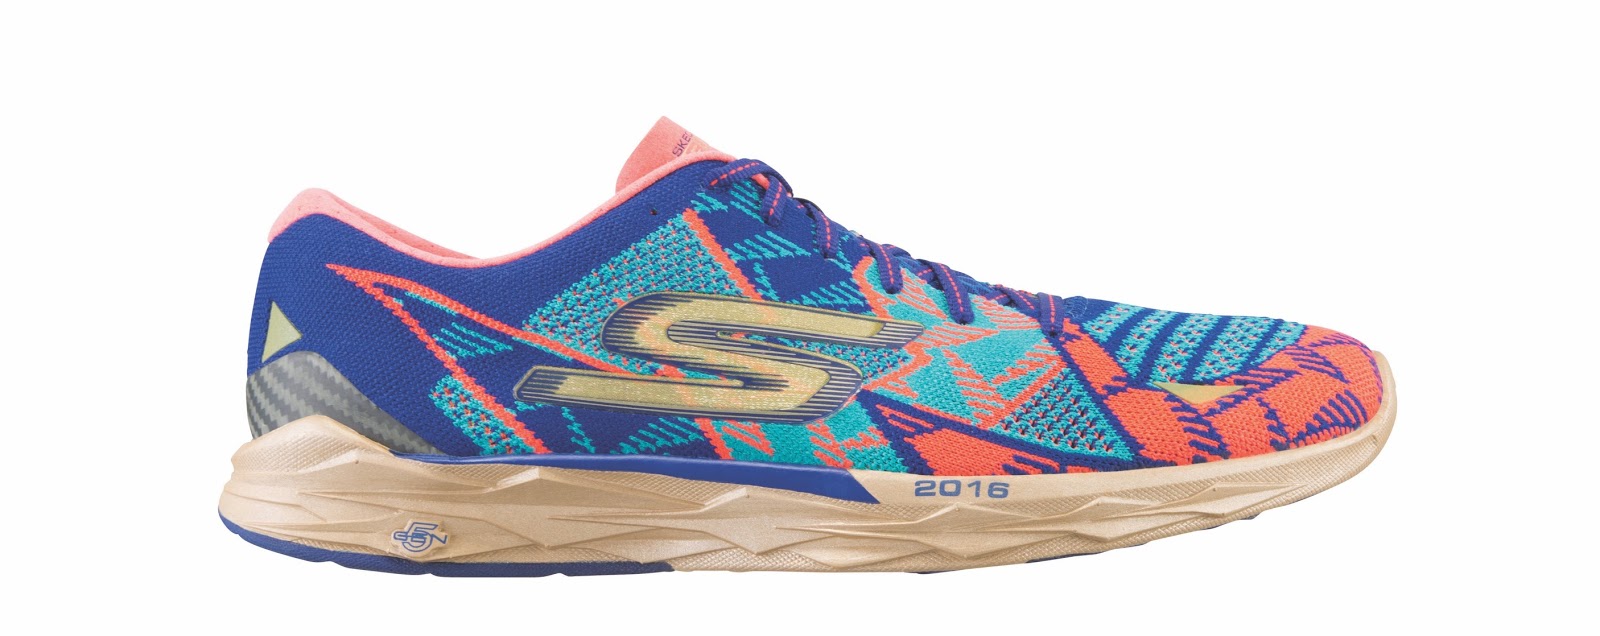 picnic En marcha Tamano relativo Road Trail Run: Skechers at Outdoor Retailer: See and Buy Meb's Special  Carbon Fiber GOMeb Speed Elite Rio Racer